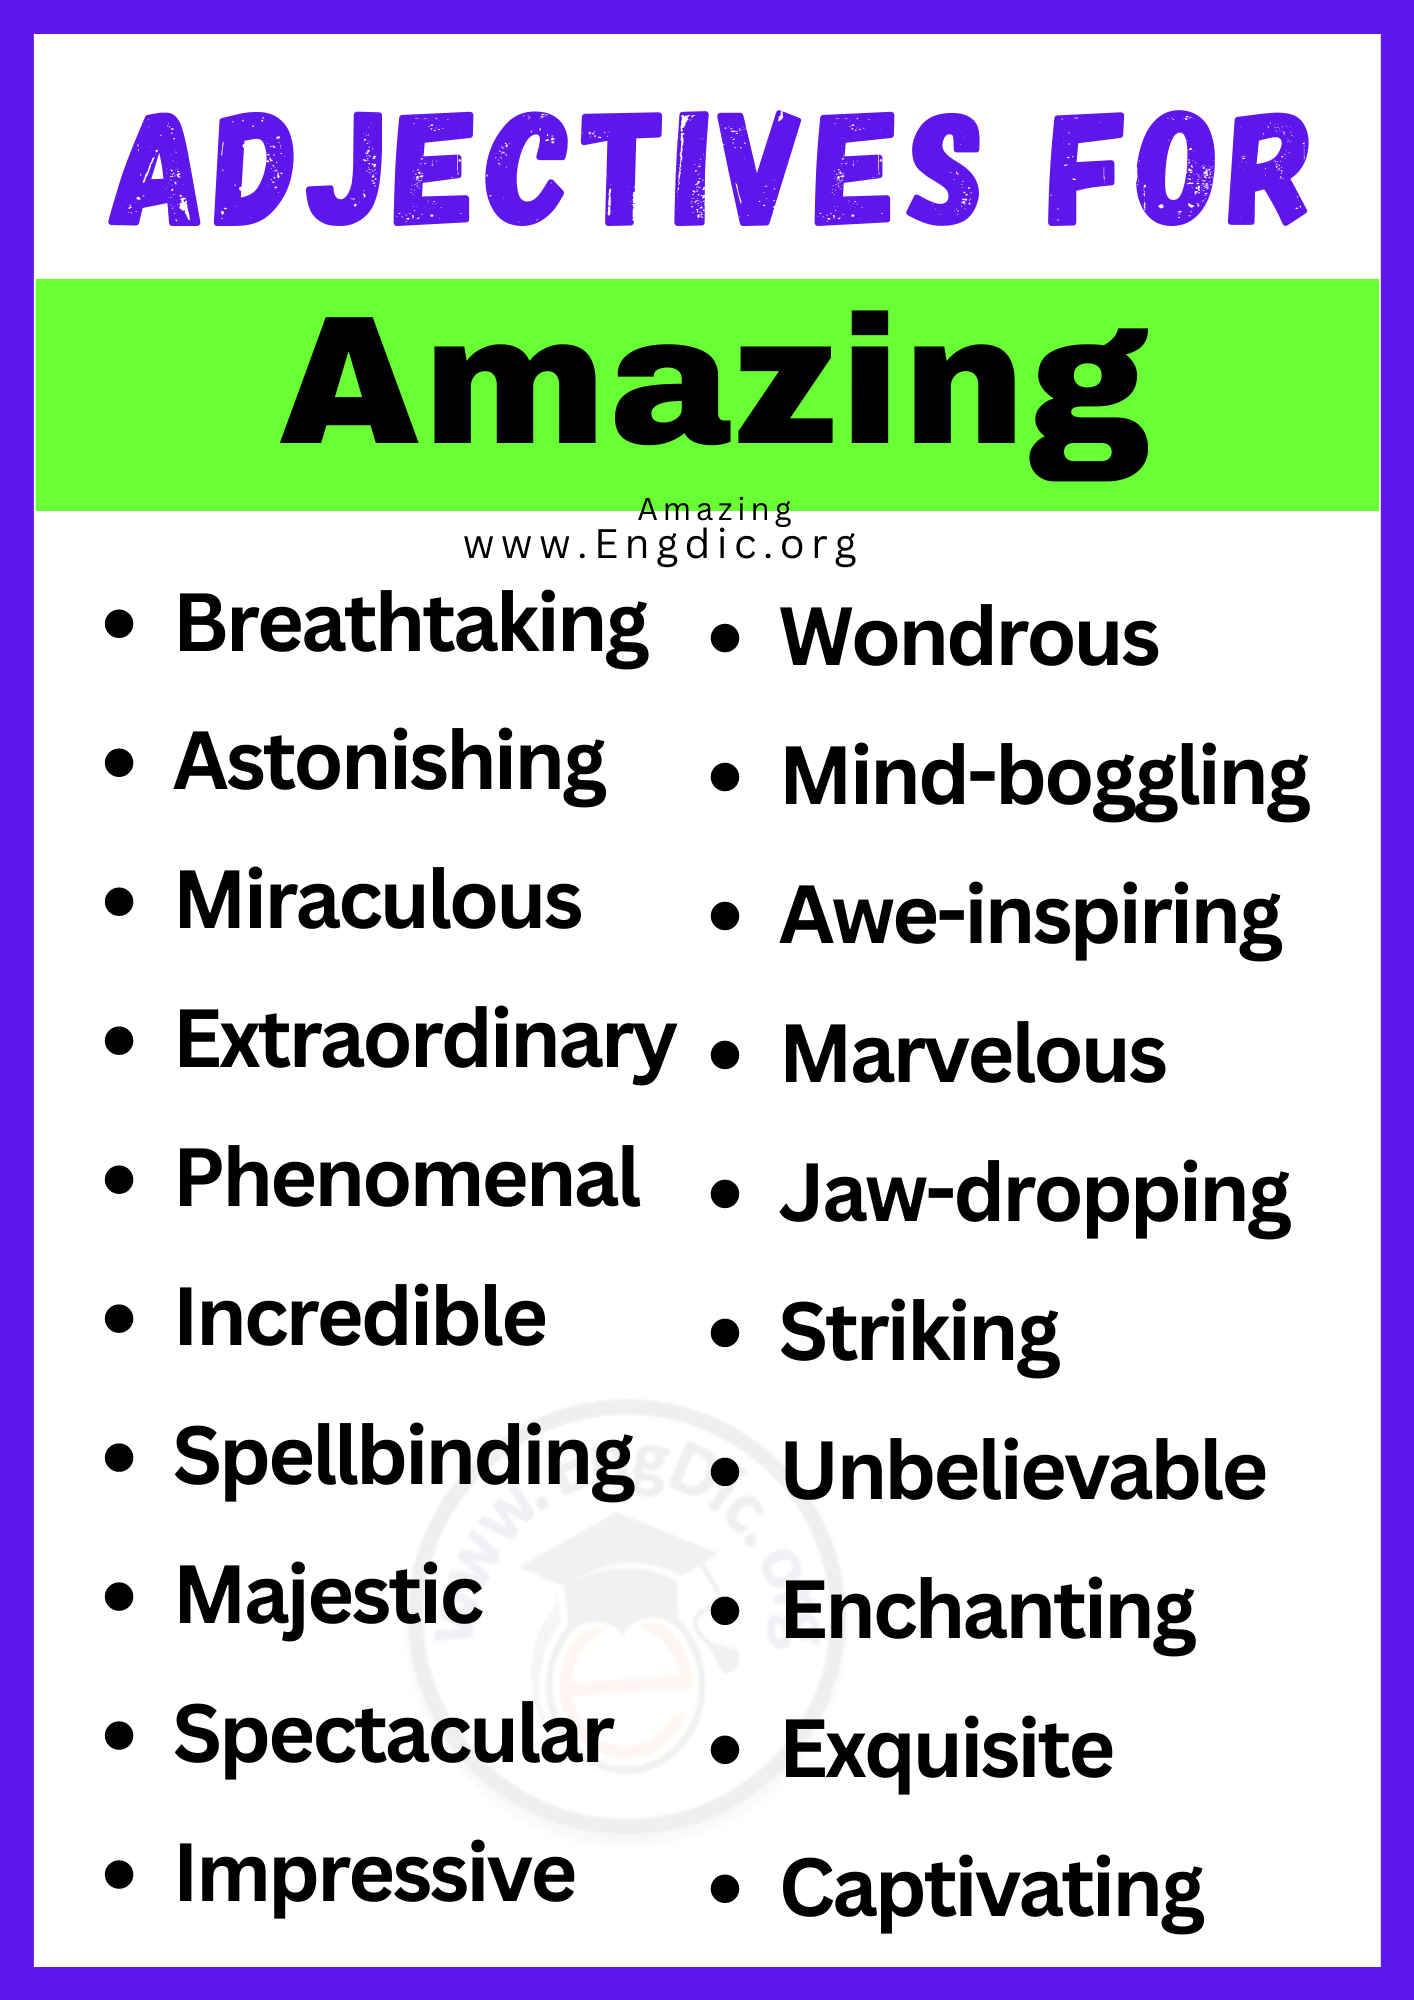 Adjectives for Amazing